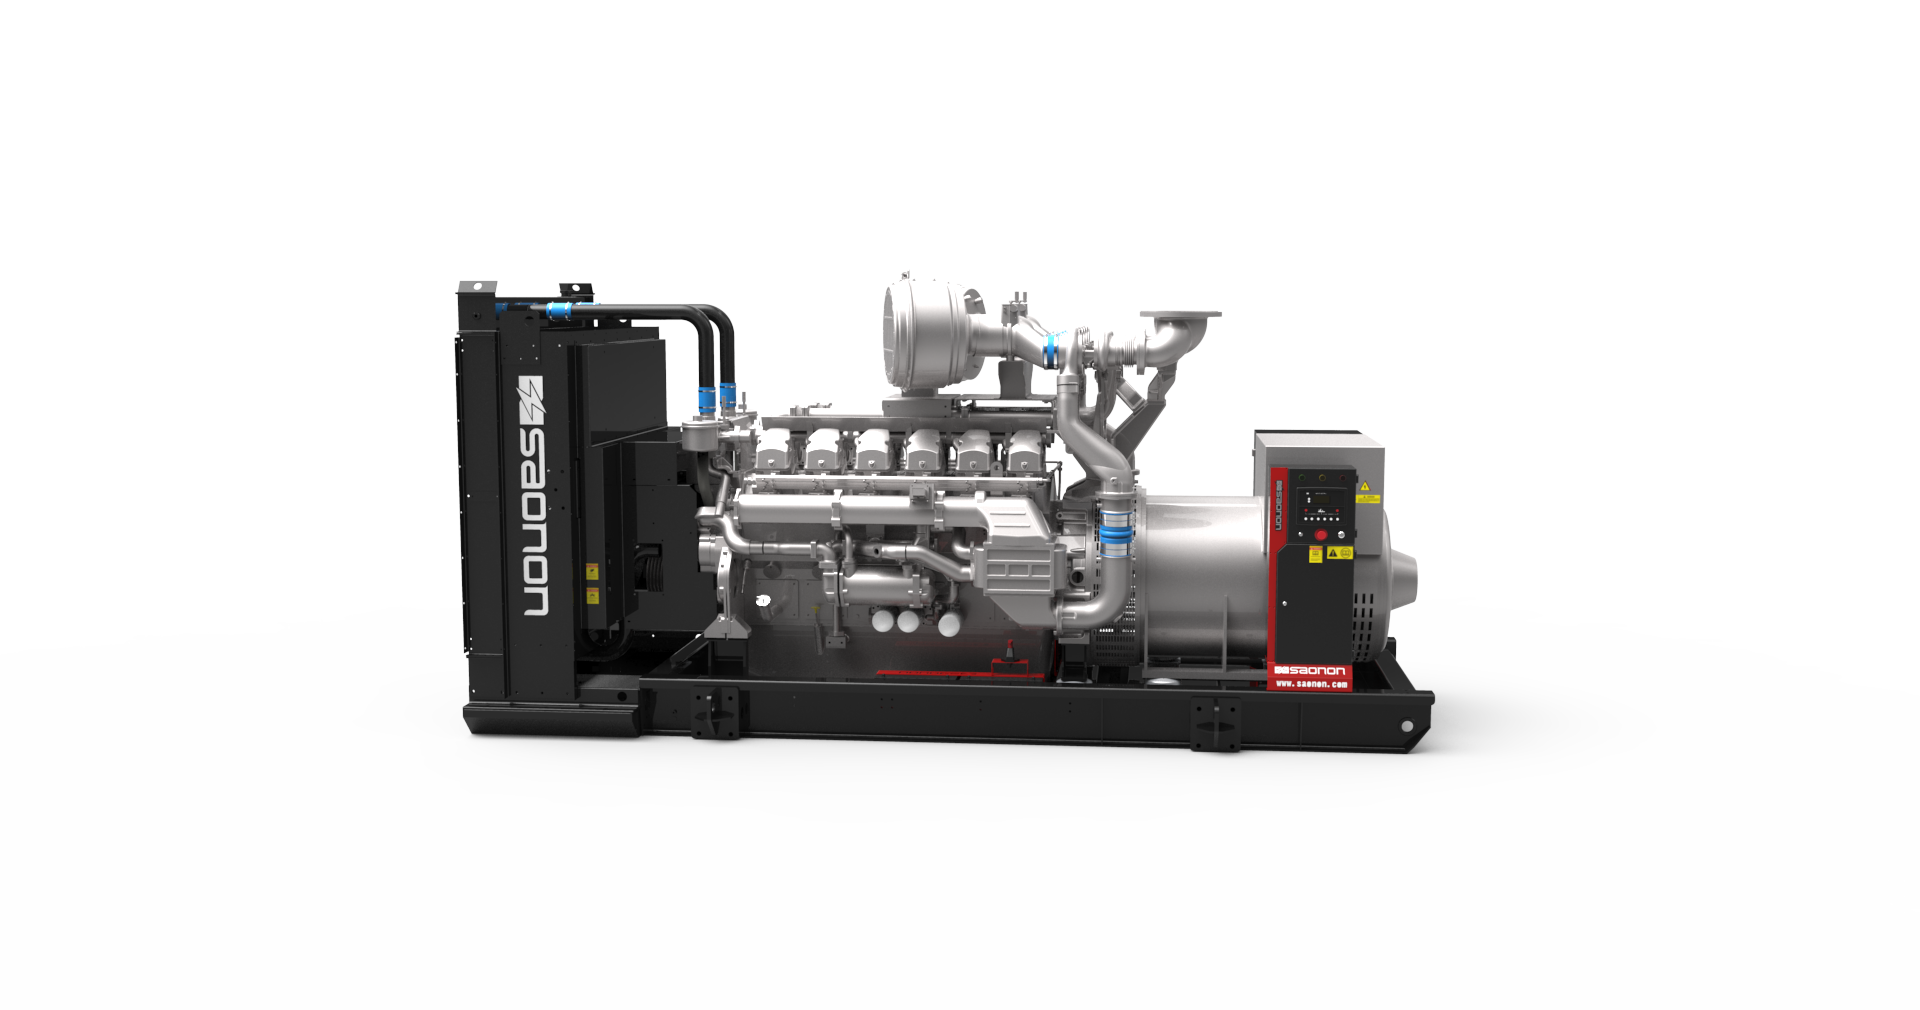 Saonon Open Type Genset Powered by Perkins